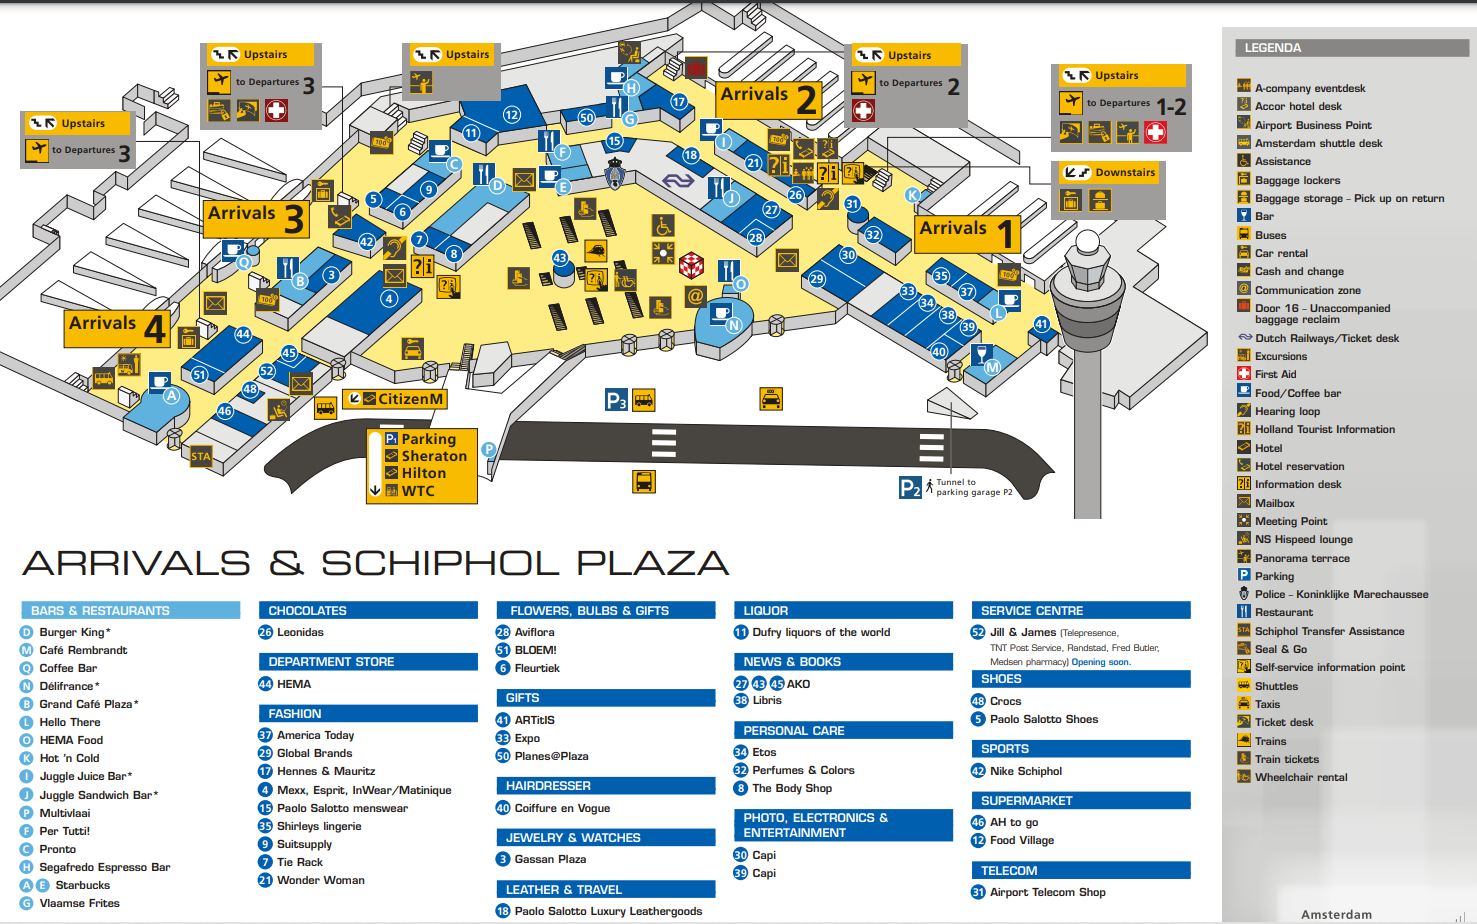 AMS Airport arrivals map